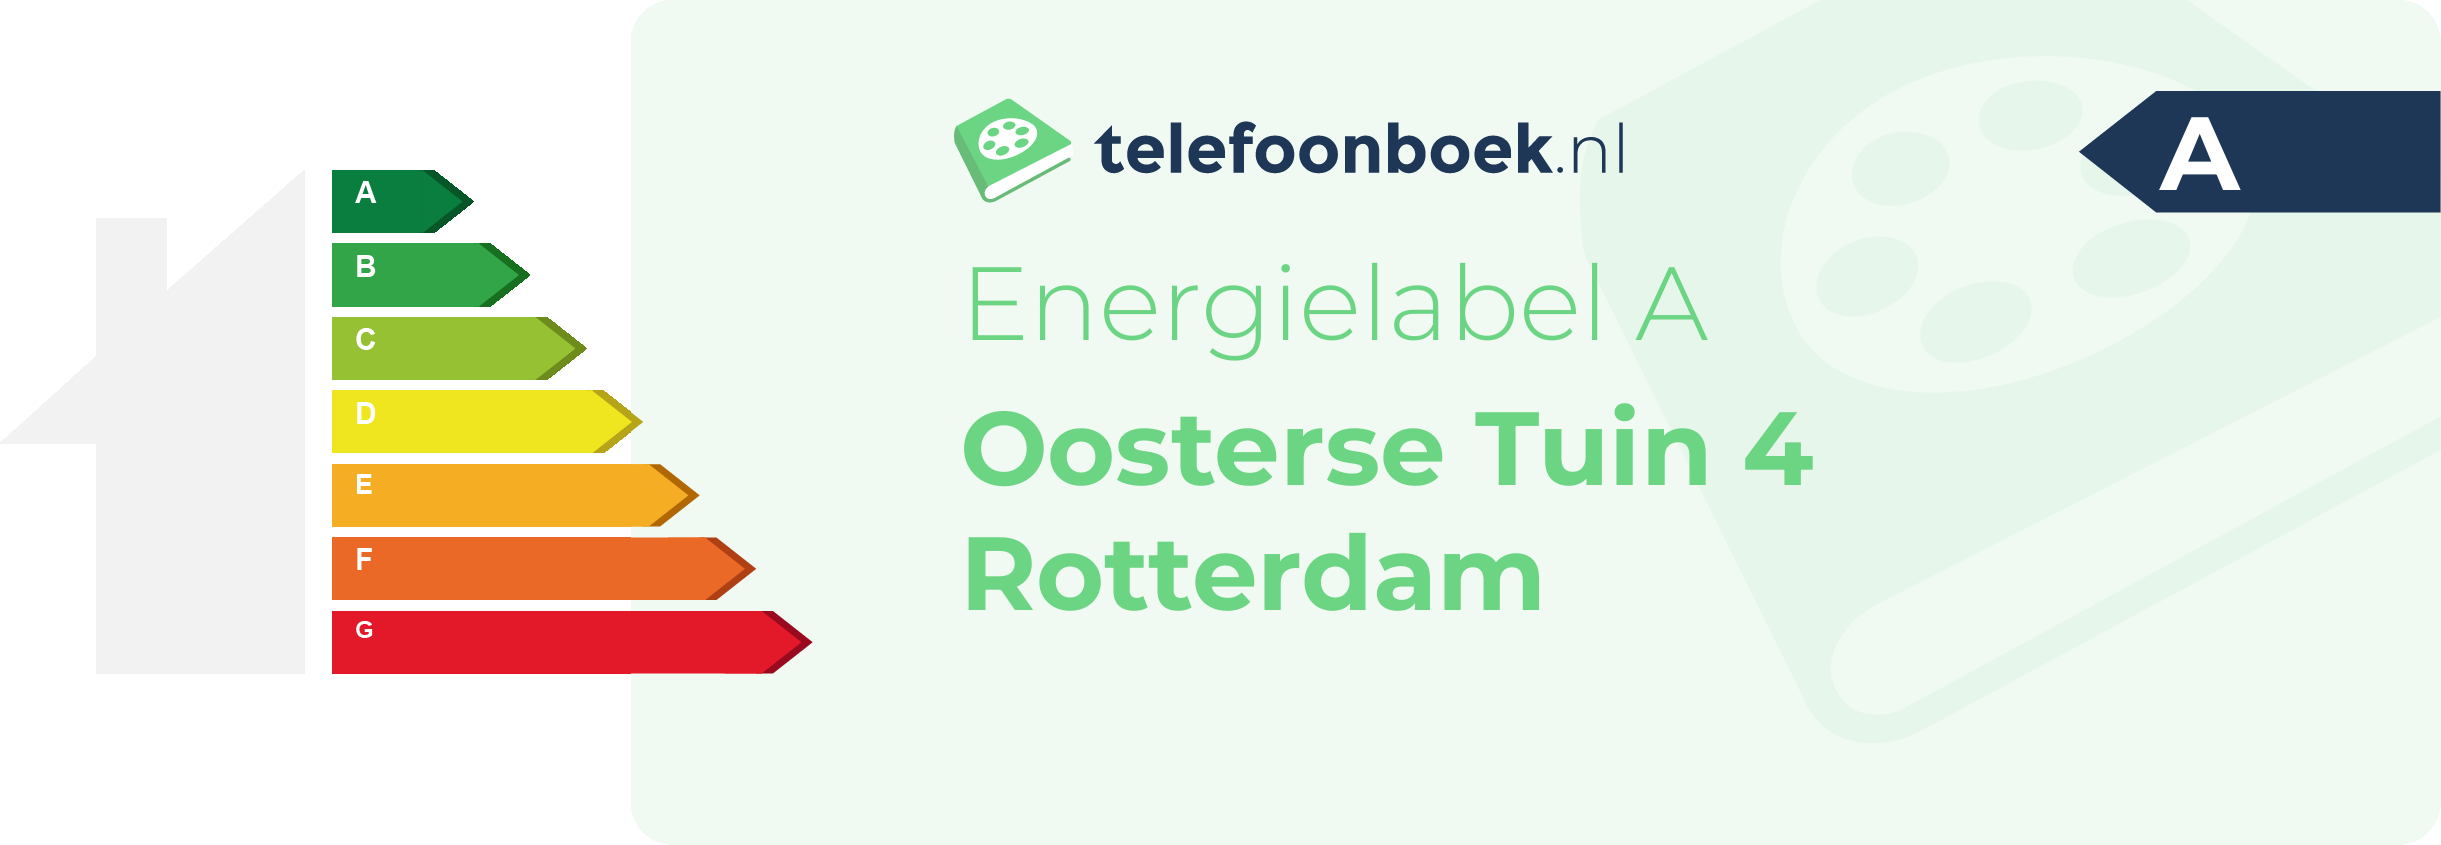 Energielabel Oosterse Tuin 4 Rotterdam